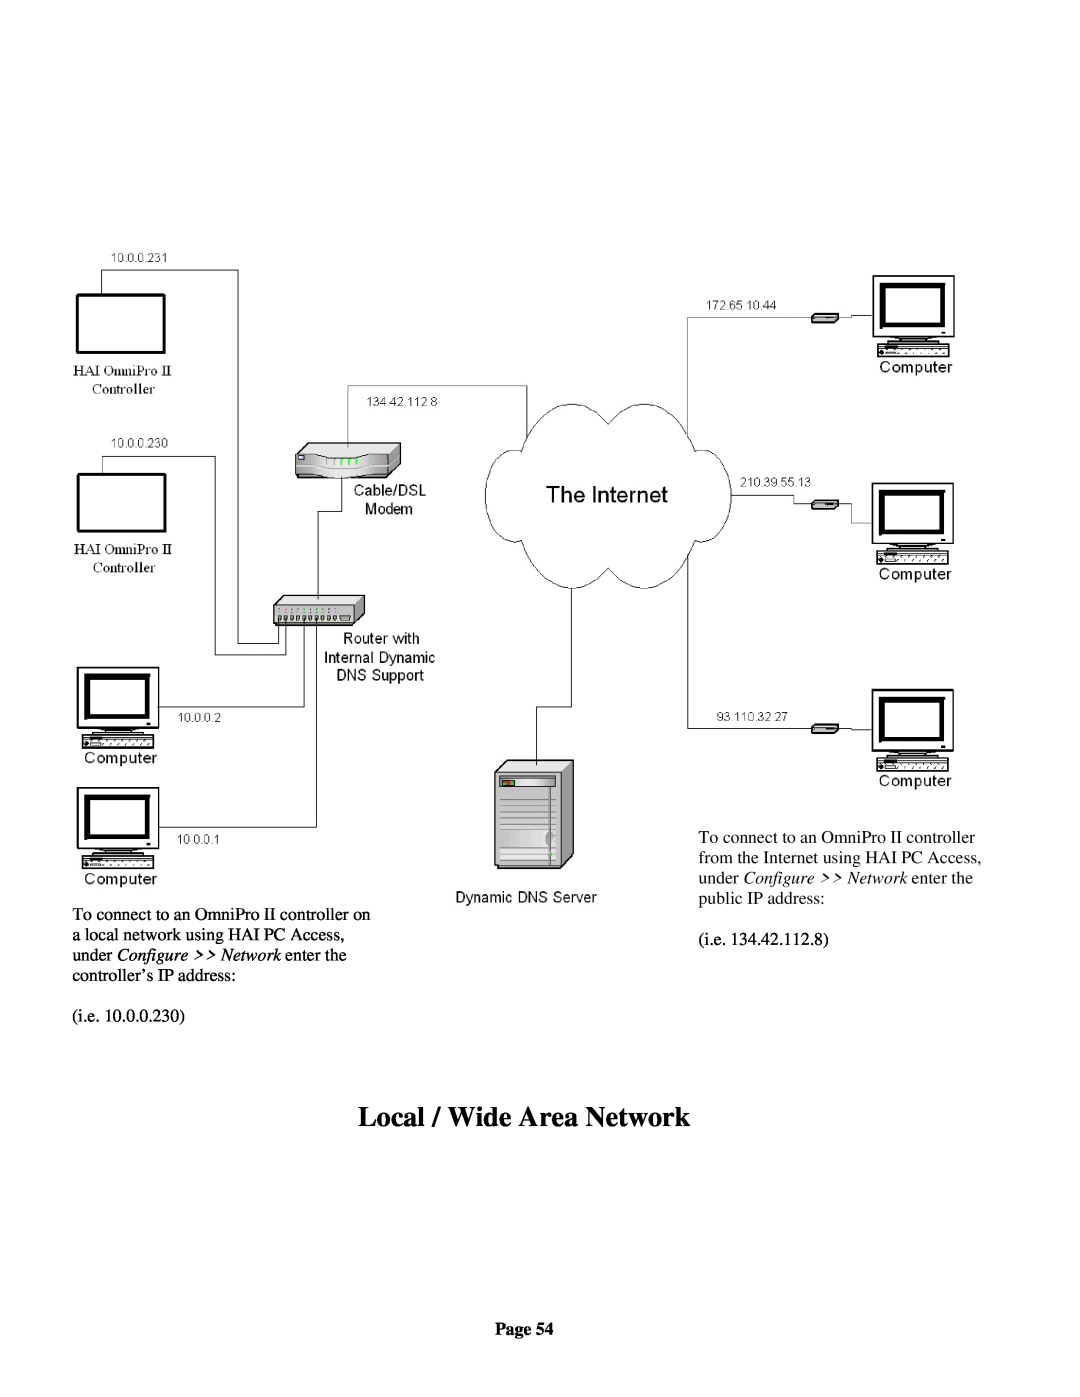 Home Automation OmniPro II owner manual Local / Wide Area Network, i.e, Page 